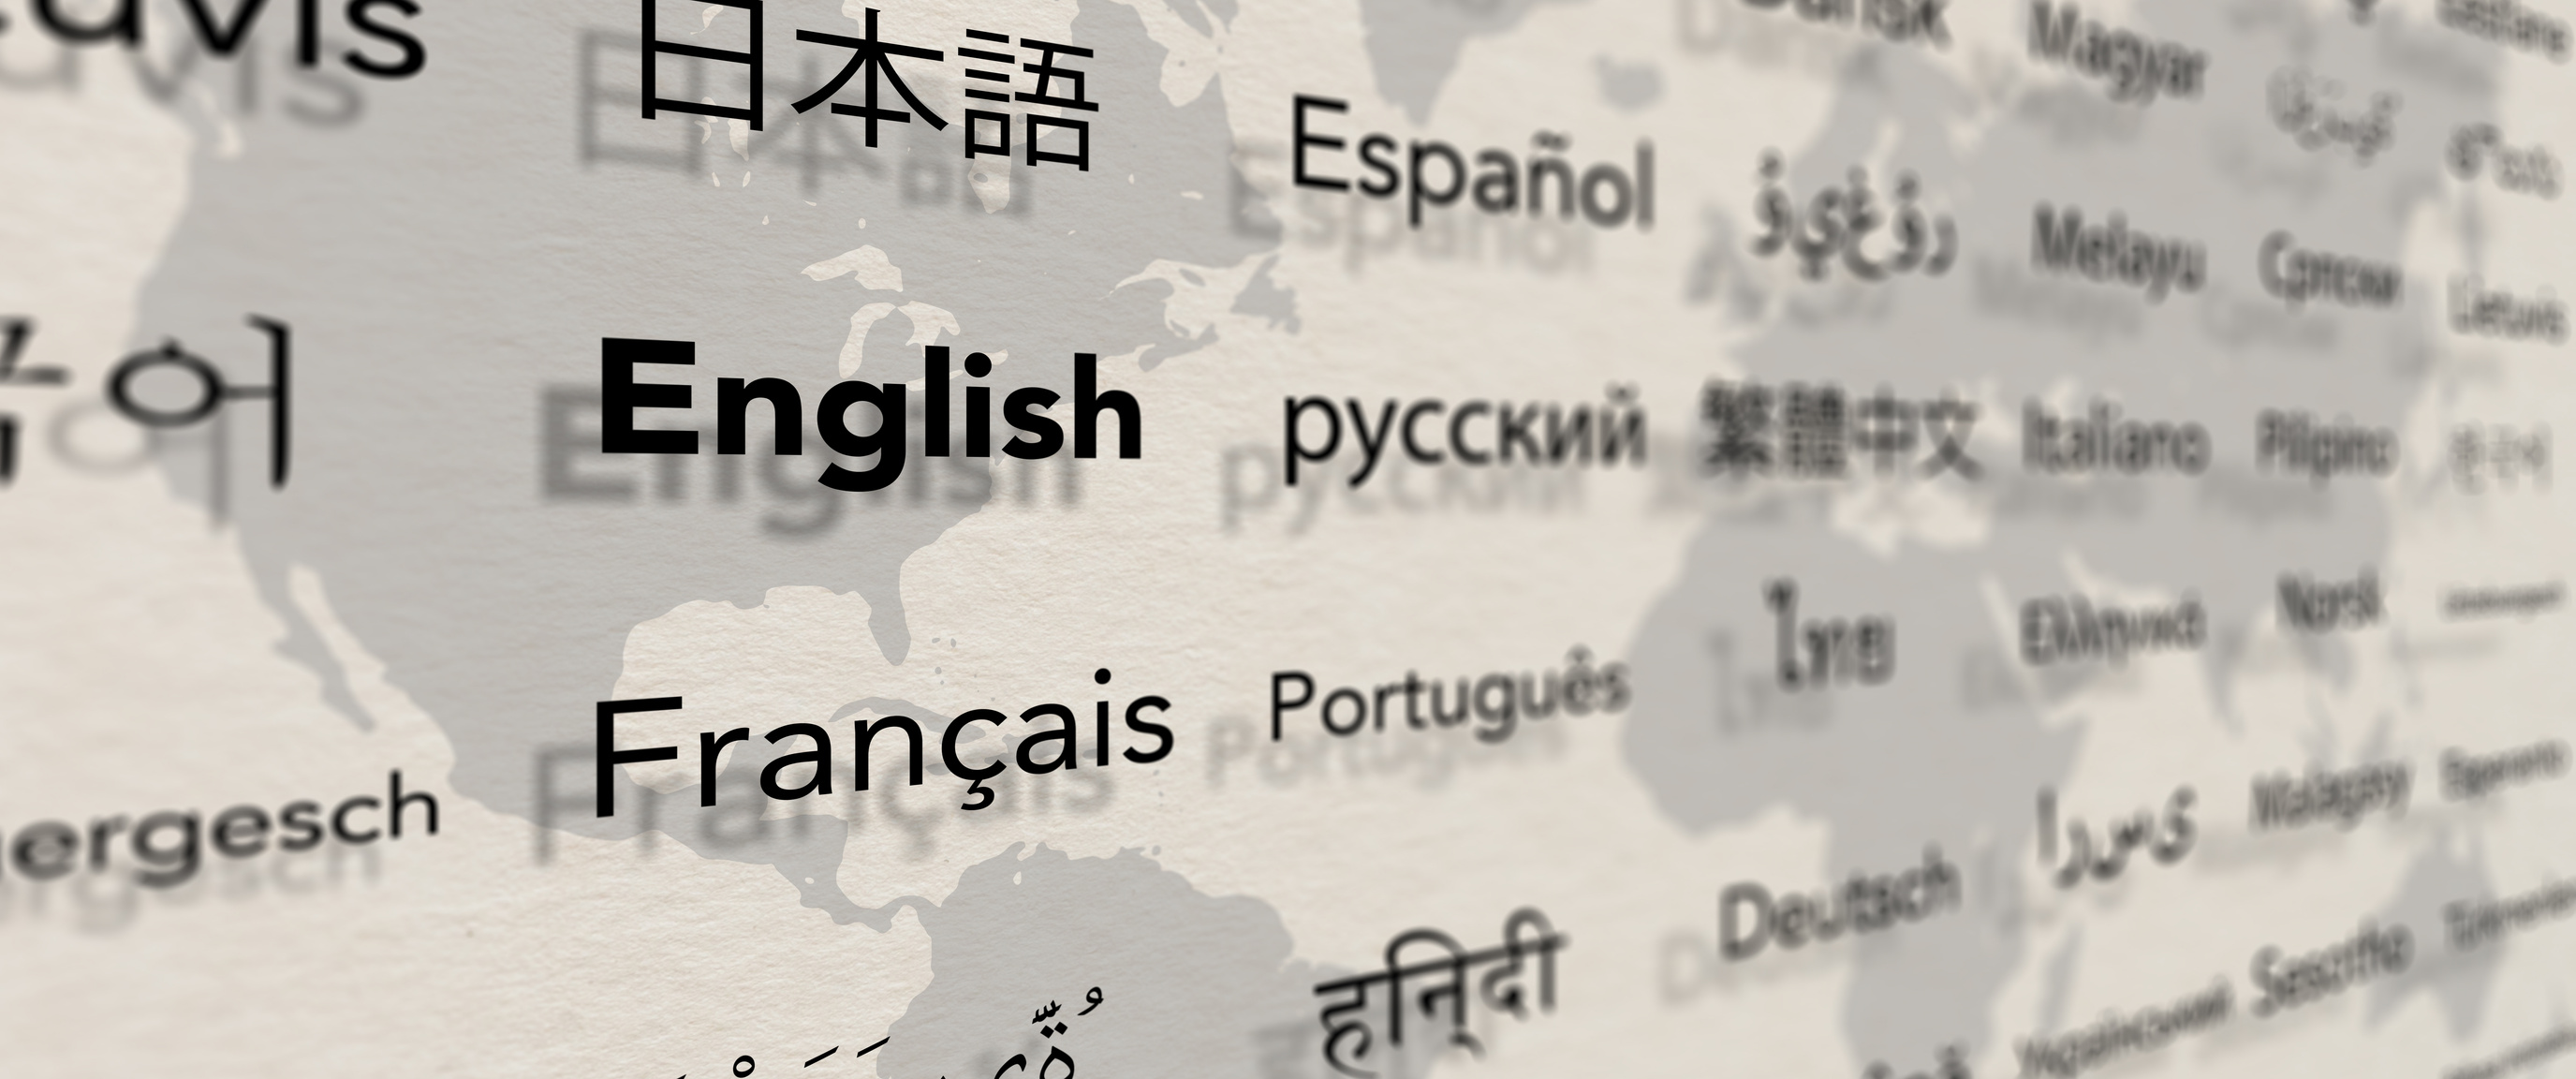 Several important languages on paper with world map background.